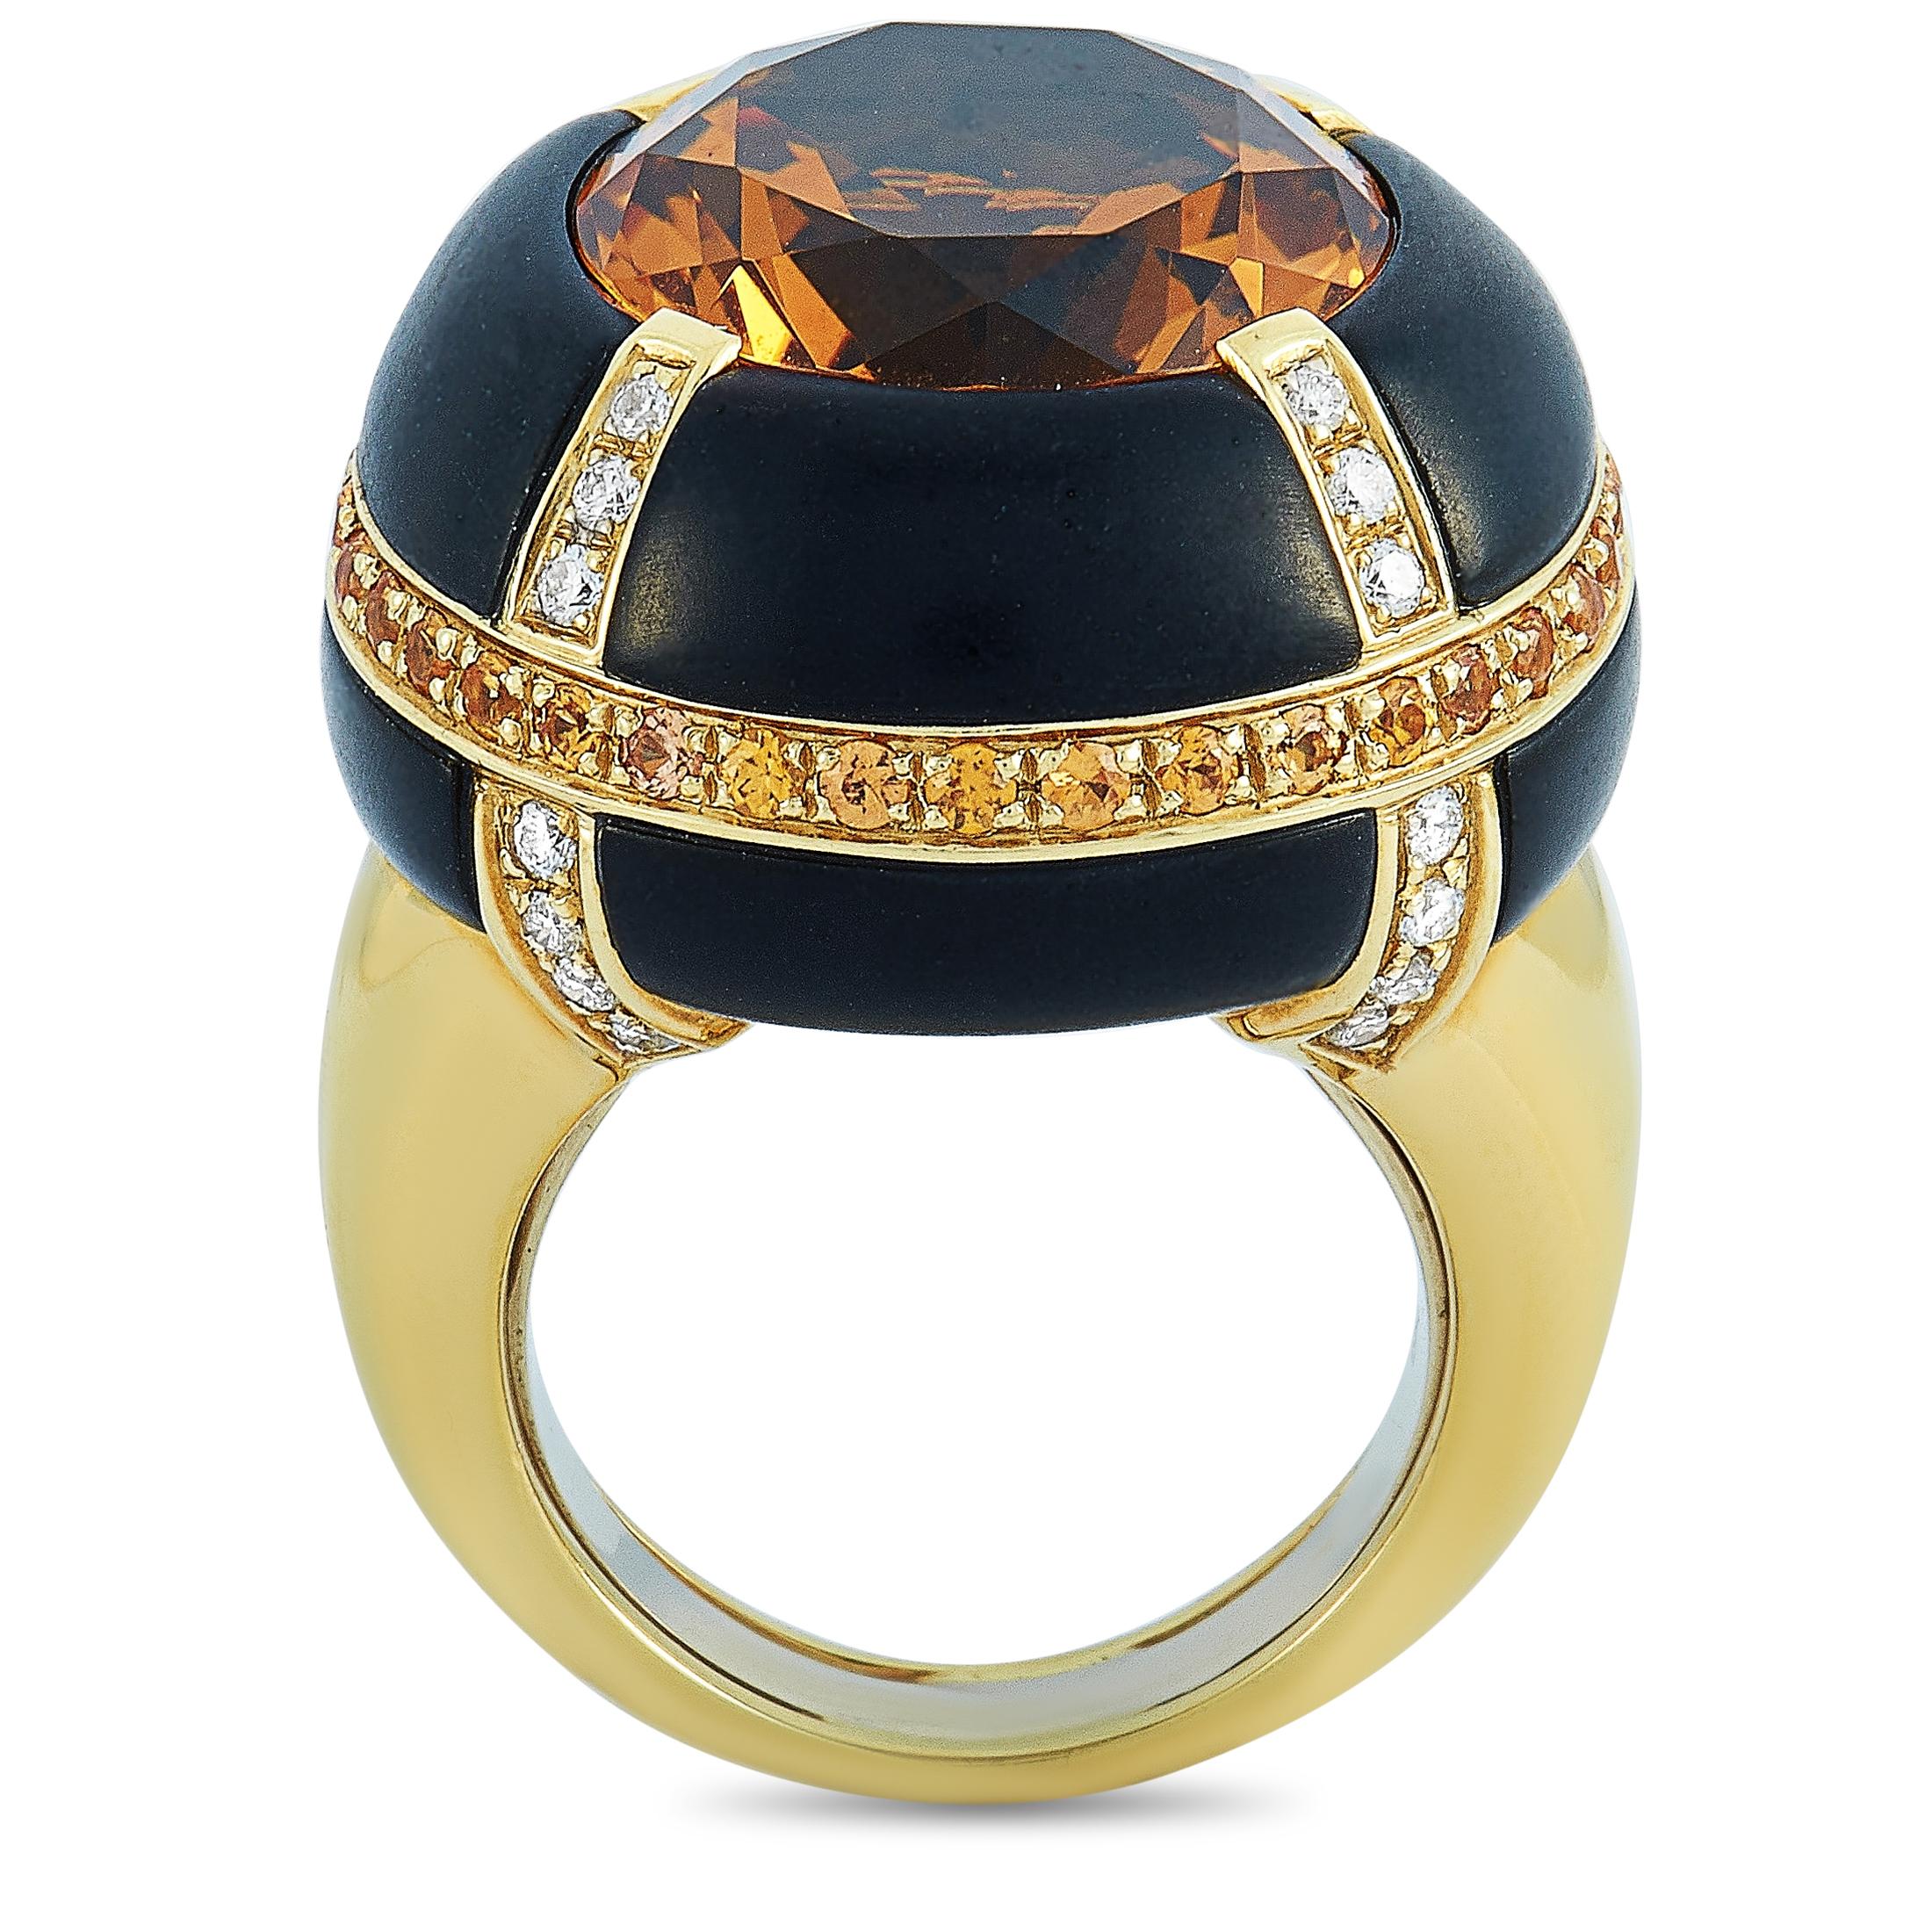 This Oro Trend ring is made of 18K yellow gold and weighs 23.3 grams, boasting band thickness of 4 mm and top height of 15 mm, while top dimensions measure 24 by 24 mm. The ring is embellished with a citrine, a total of 0.37 carats of diamonds, and